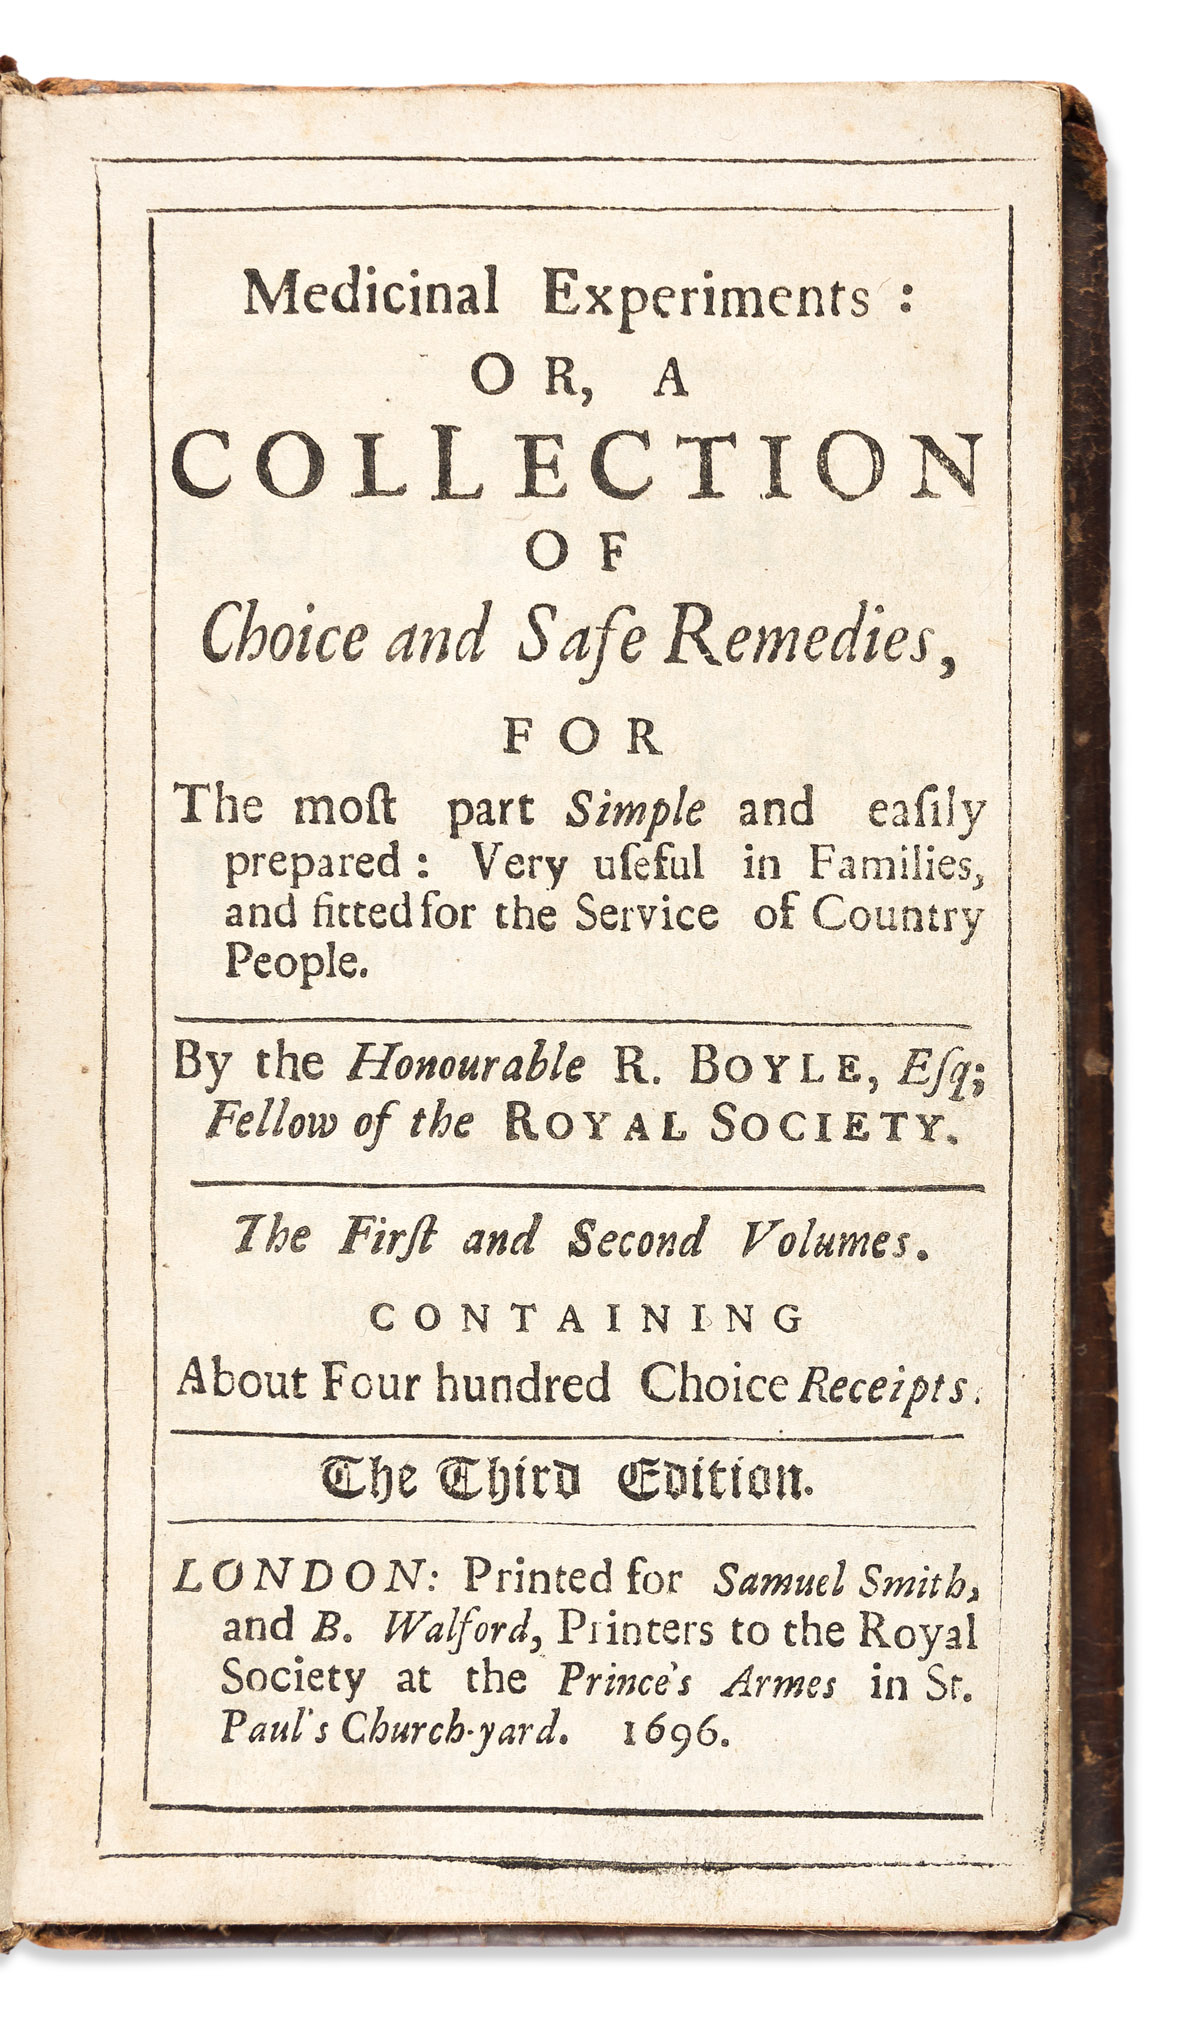 Boyle, Robert (1627-1691) Medicinal Experiments: or a Collection of Choice and Safe Remedies.